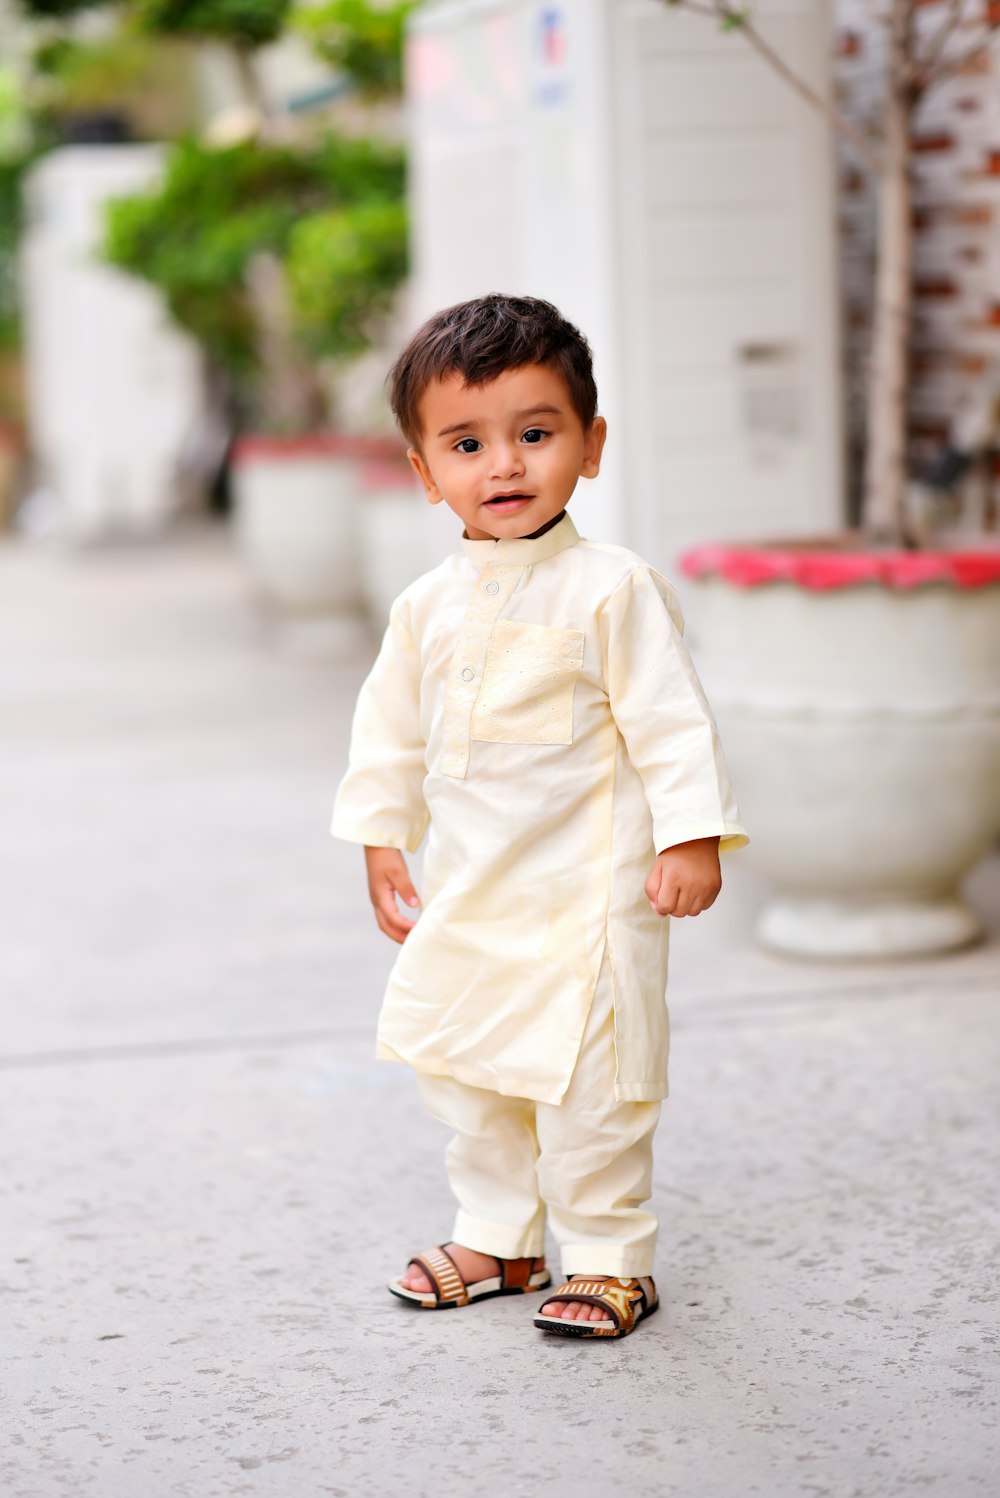 a little boy in a white outfit standing on a sidewalk